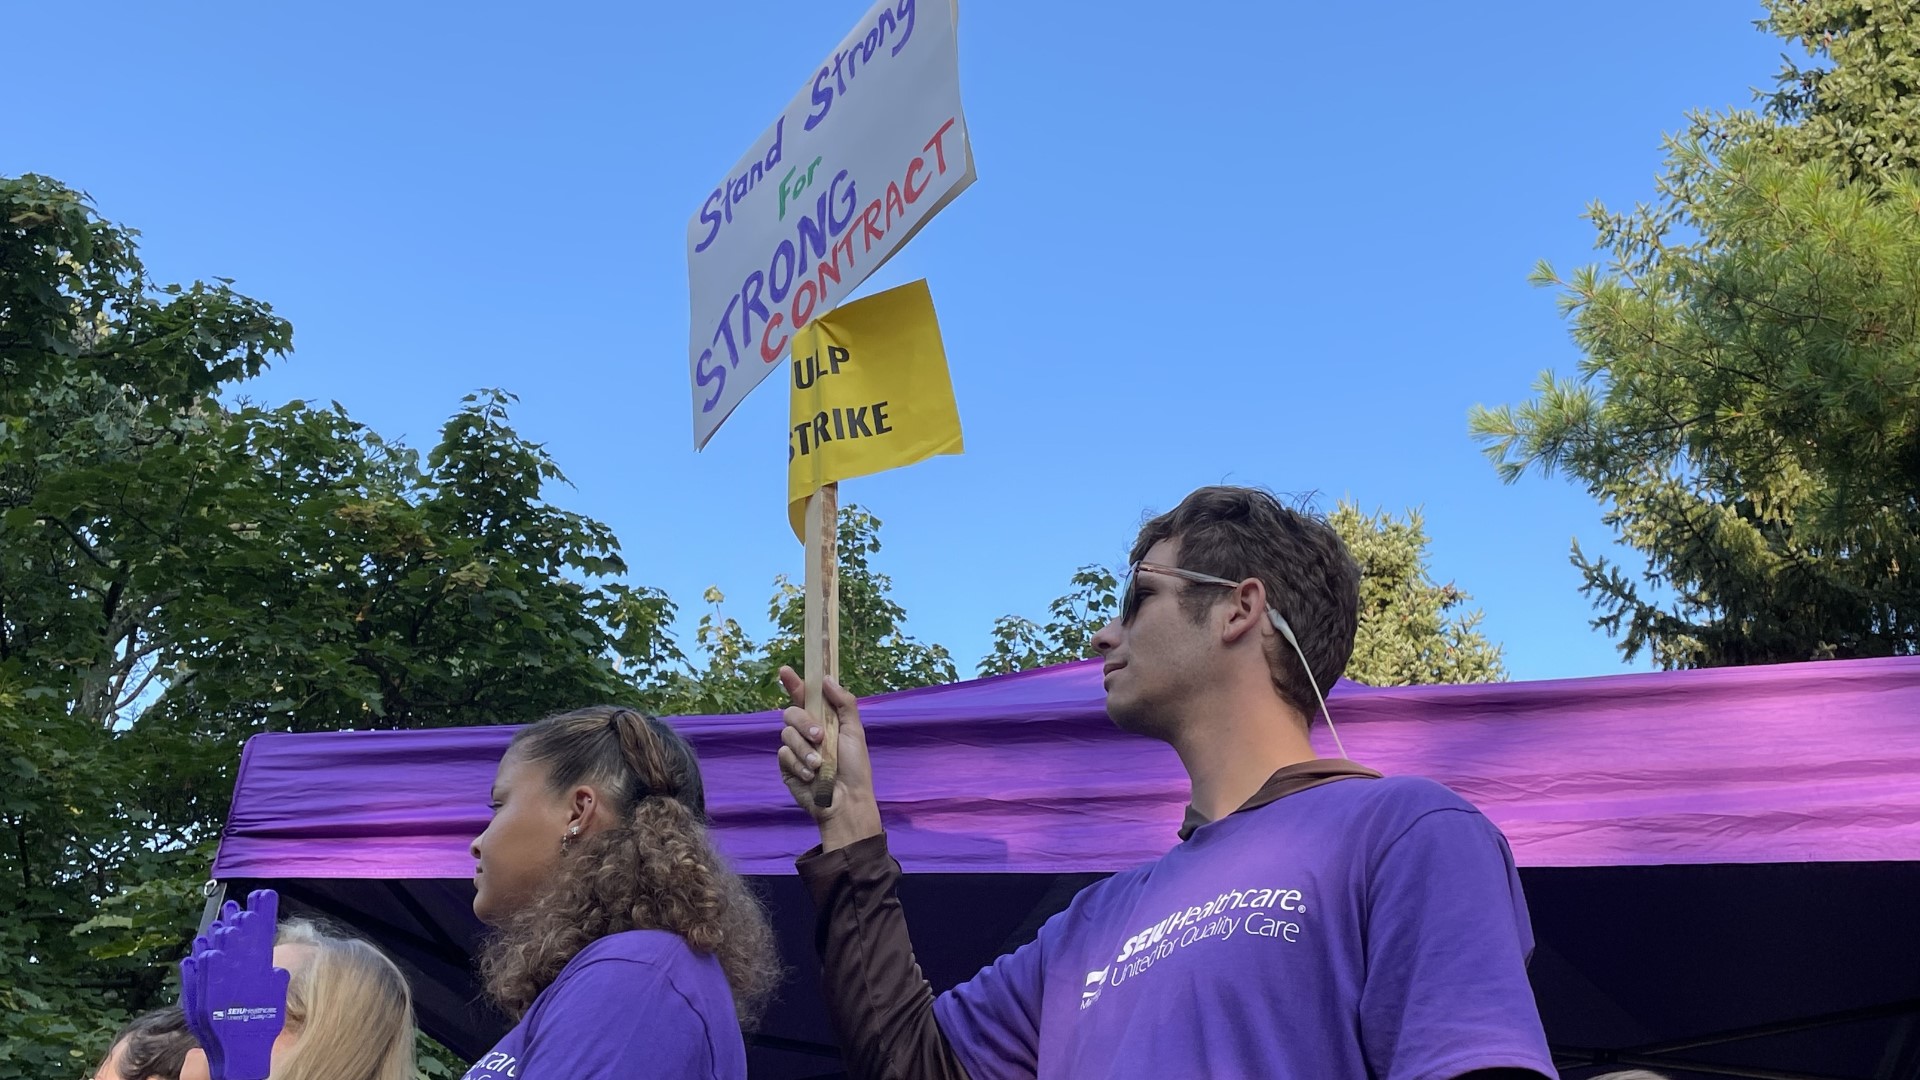 Dozens of workers began the strike Friday morning outside the hospital, where they are calling for higher wages and better working conditions.